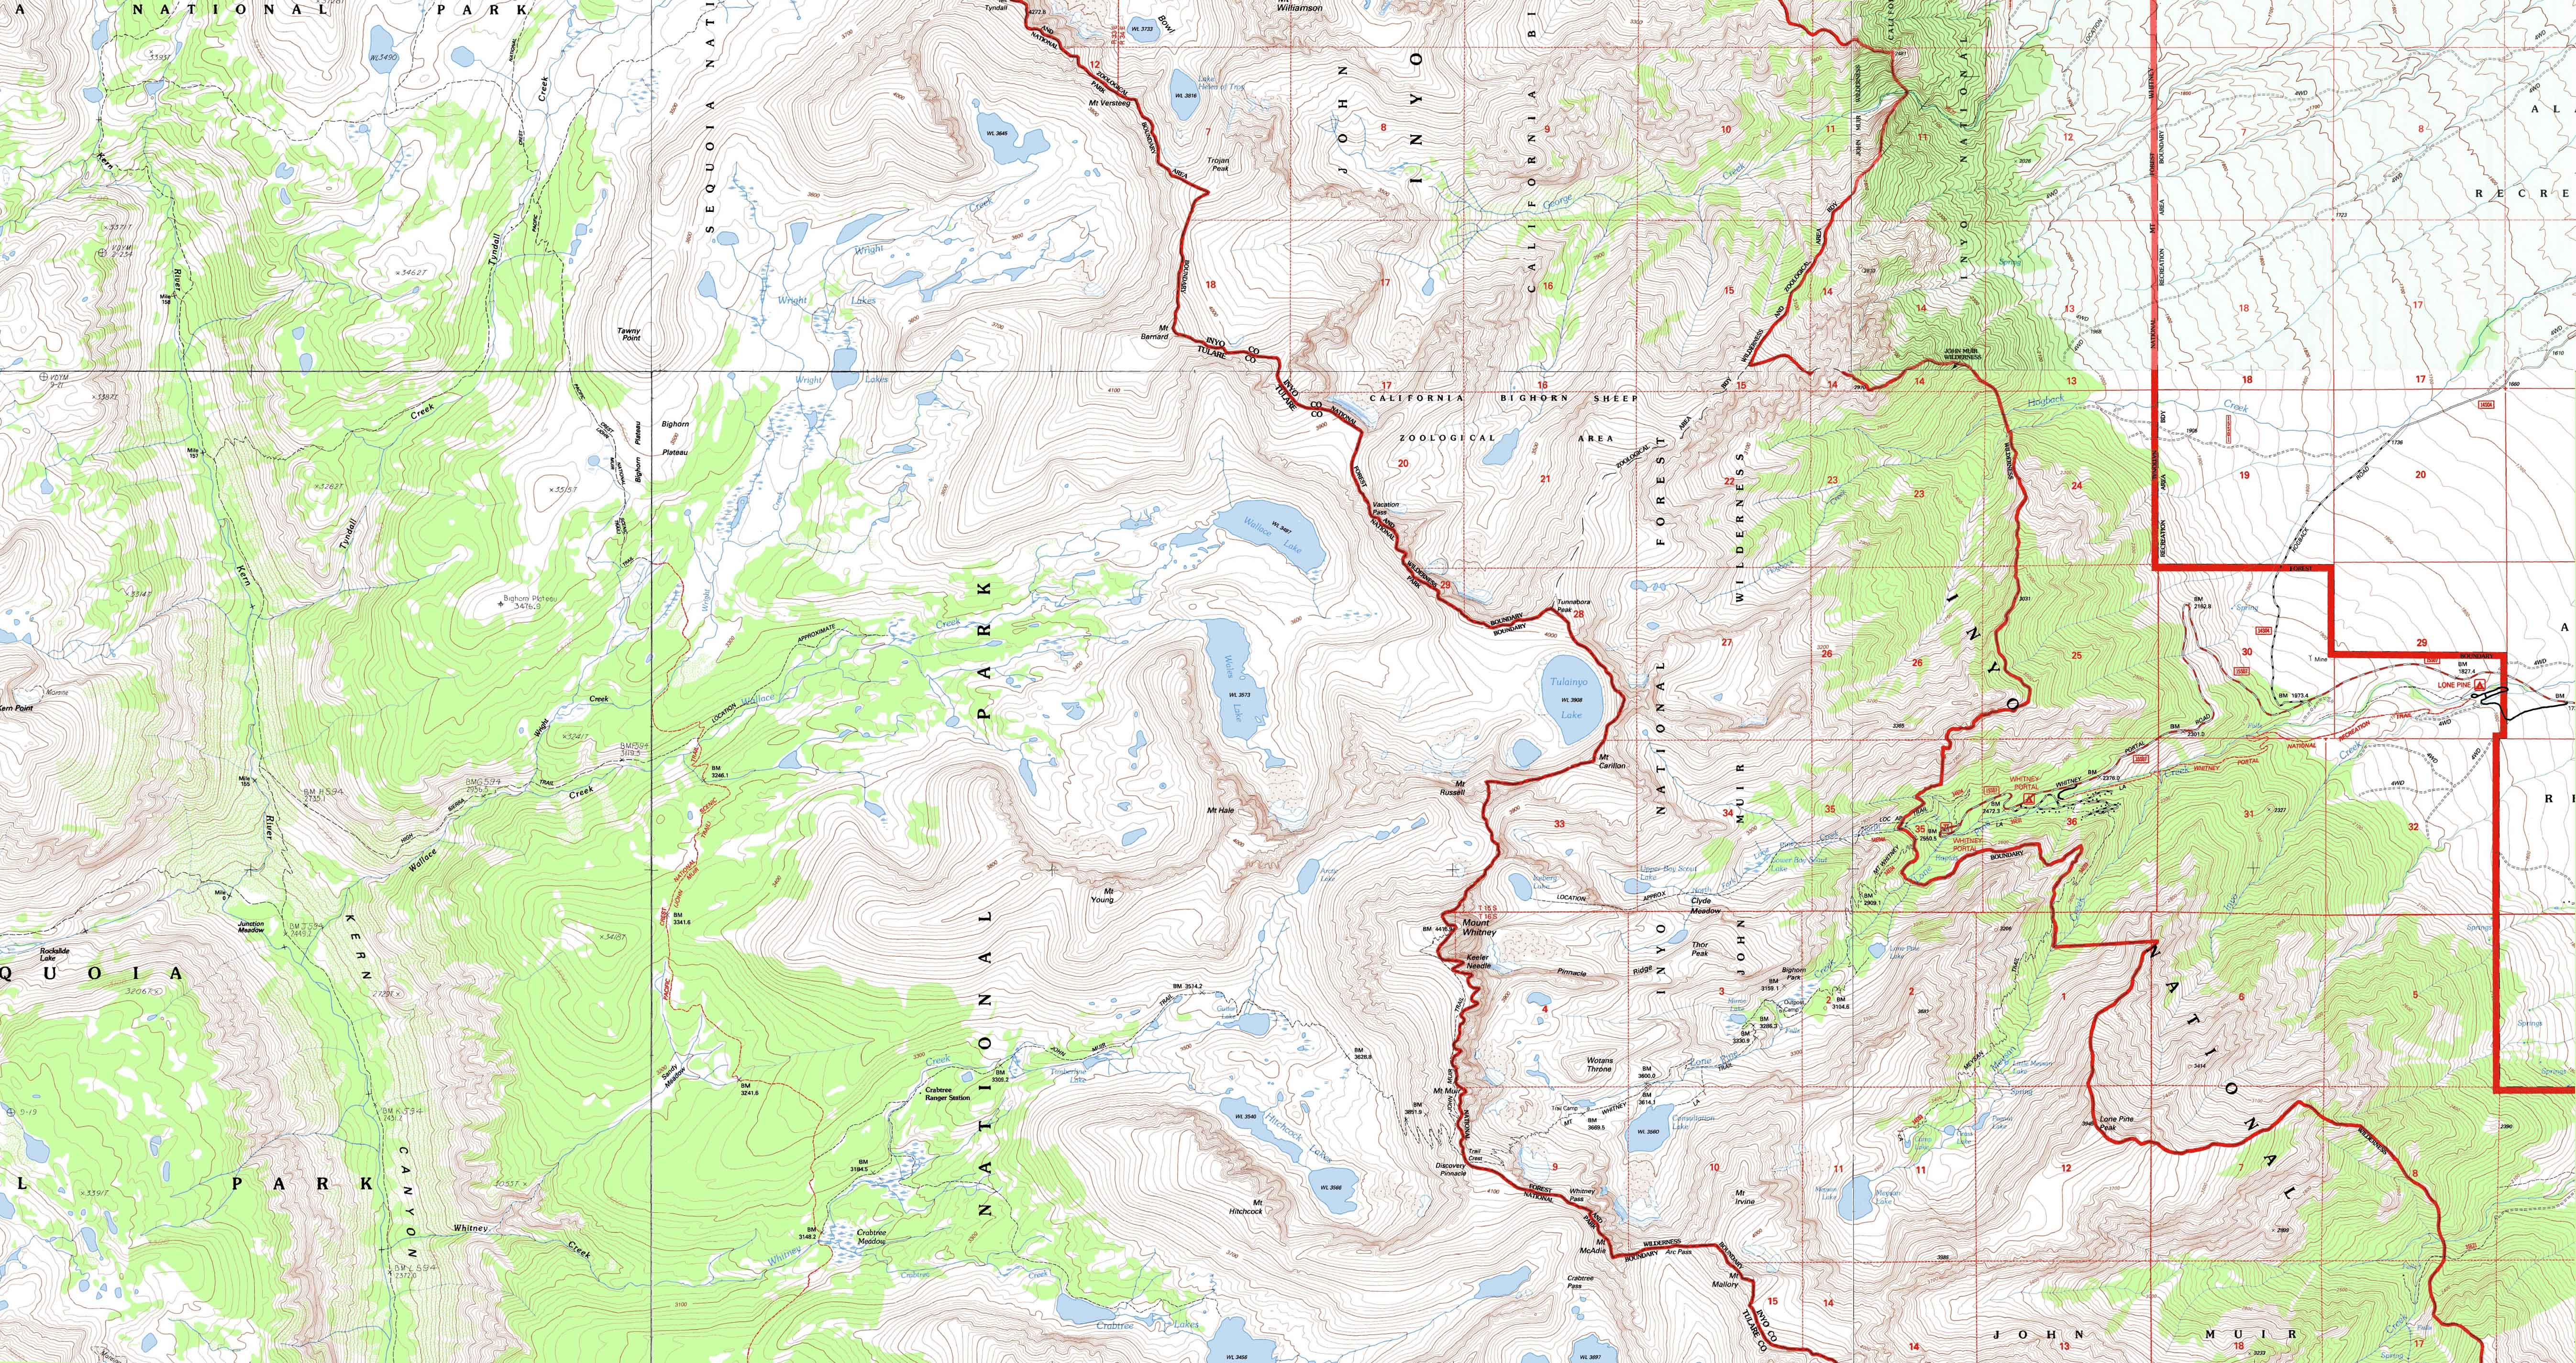 The end of the John Muir Trail Backpacking map from Tyndall Creek to the Mount Whitney Portal.